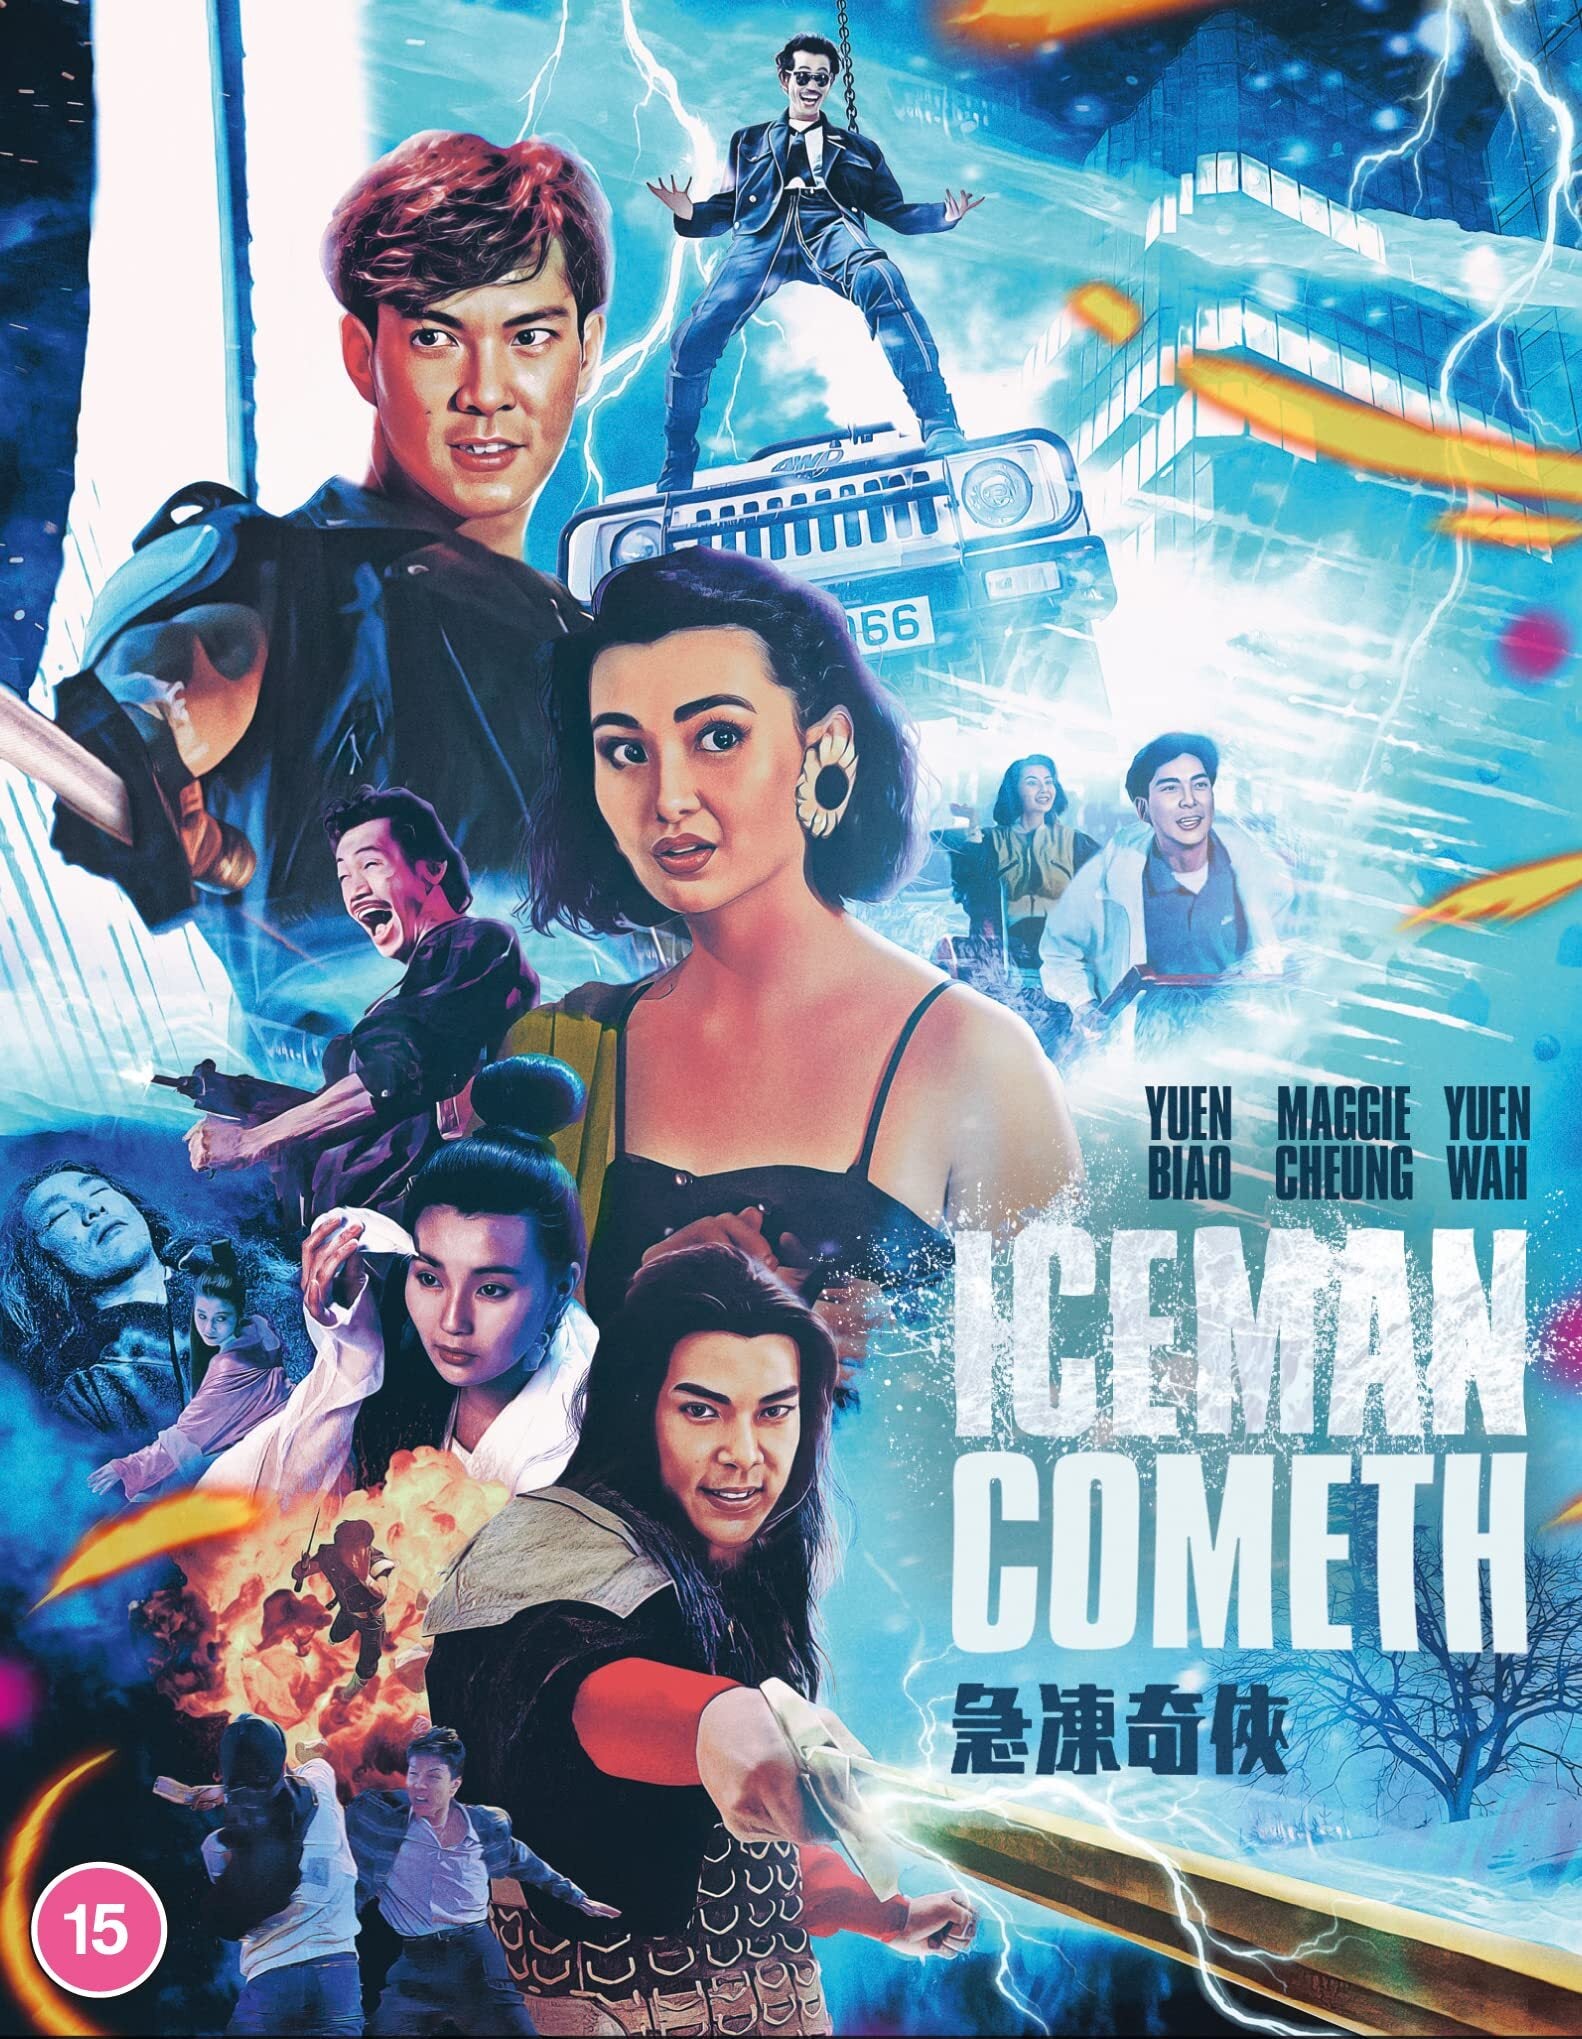 THE ICEMAN COMETH (REGION B IMPORT - LIMITED EDITION) BLU-RAY [SCRATCH AND DENT]